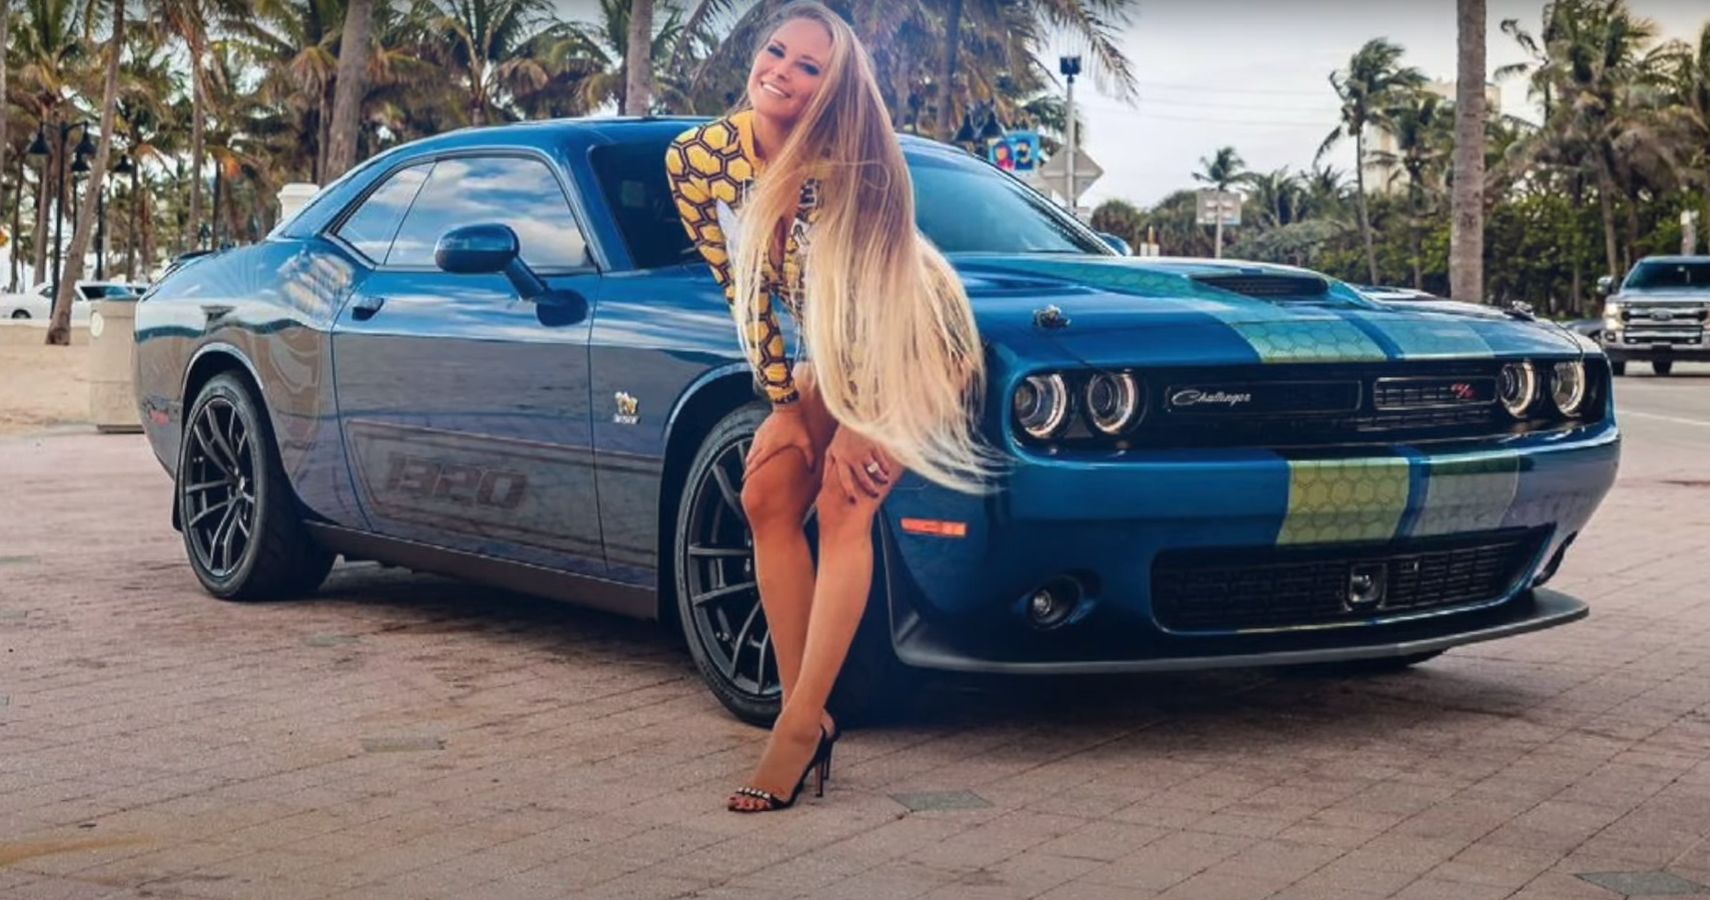 Playboy Playmate Audra Lynn Gets Her Dodge Challenger Wrapped - Flipboard.